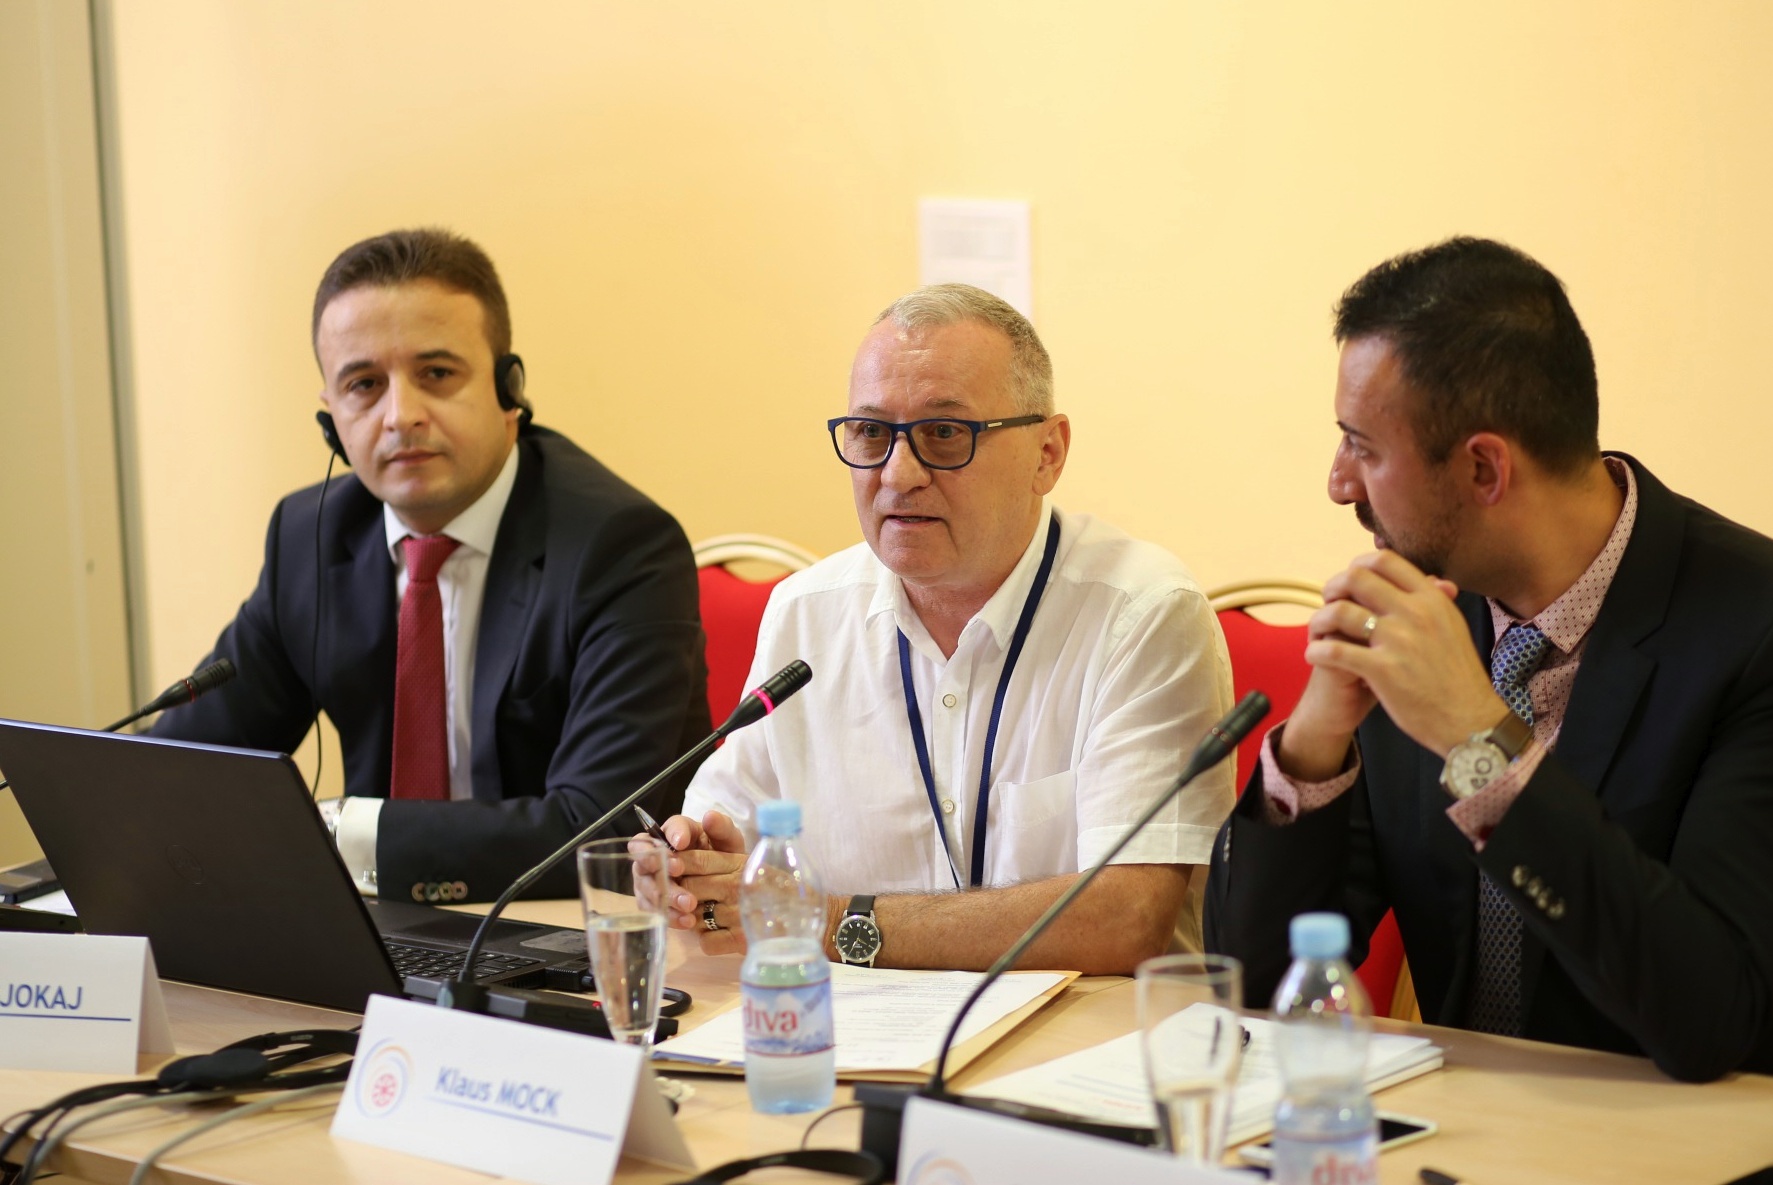 Opening addresses of the “Holistic Approach to Housing for Roma in the Enlargement Region” conference, organized by the Regional Cooperation Council (RCC)’s Roma Integration 2020 (RI2020) Action Team, in Bar (Montenegro), on 31 May 2018. (Photo: RCC/Radonja Srdanovic)